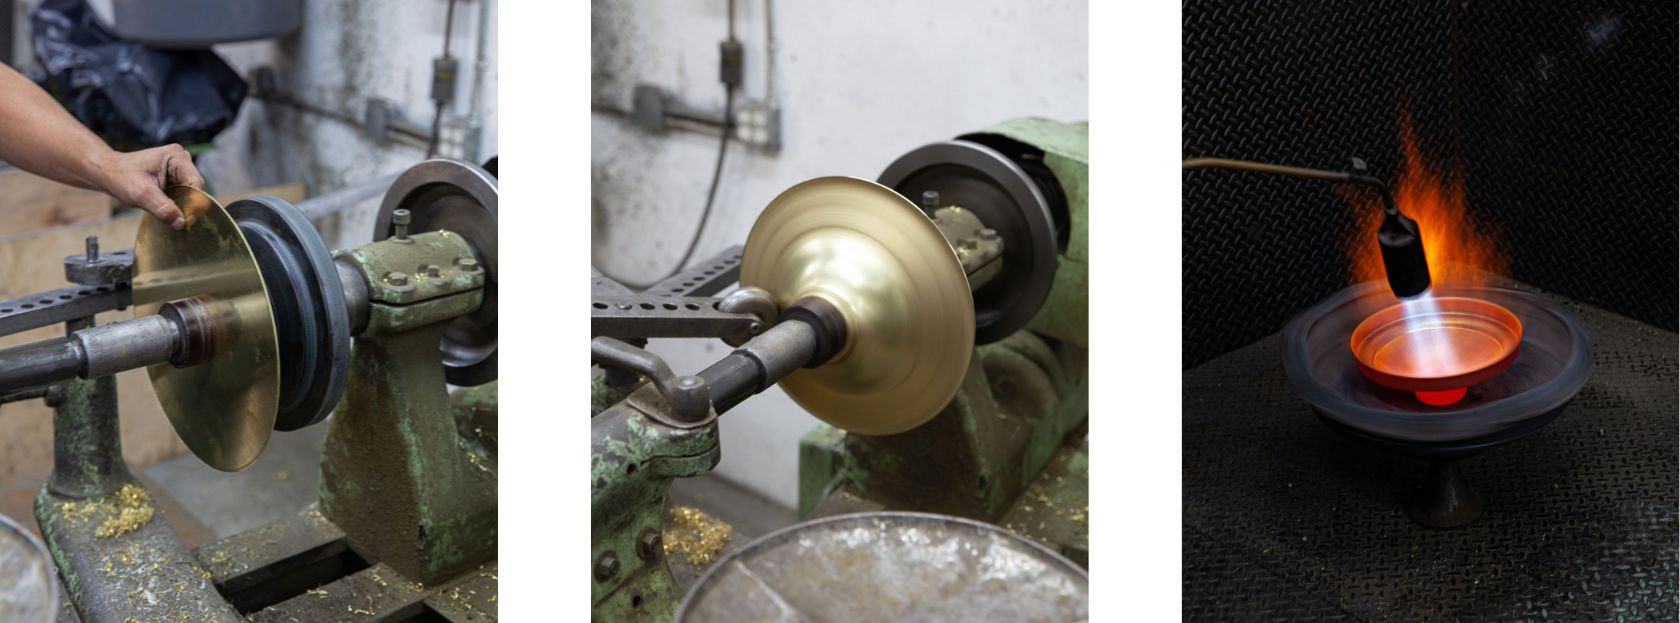 The spinning process - a flat disc of brass being mounted on a spinning lathe, spun into the desired shape, and then fired.